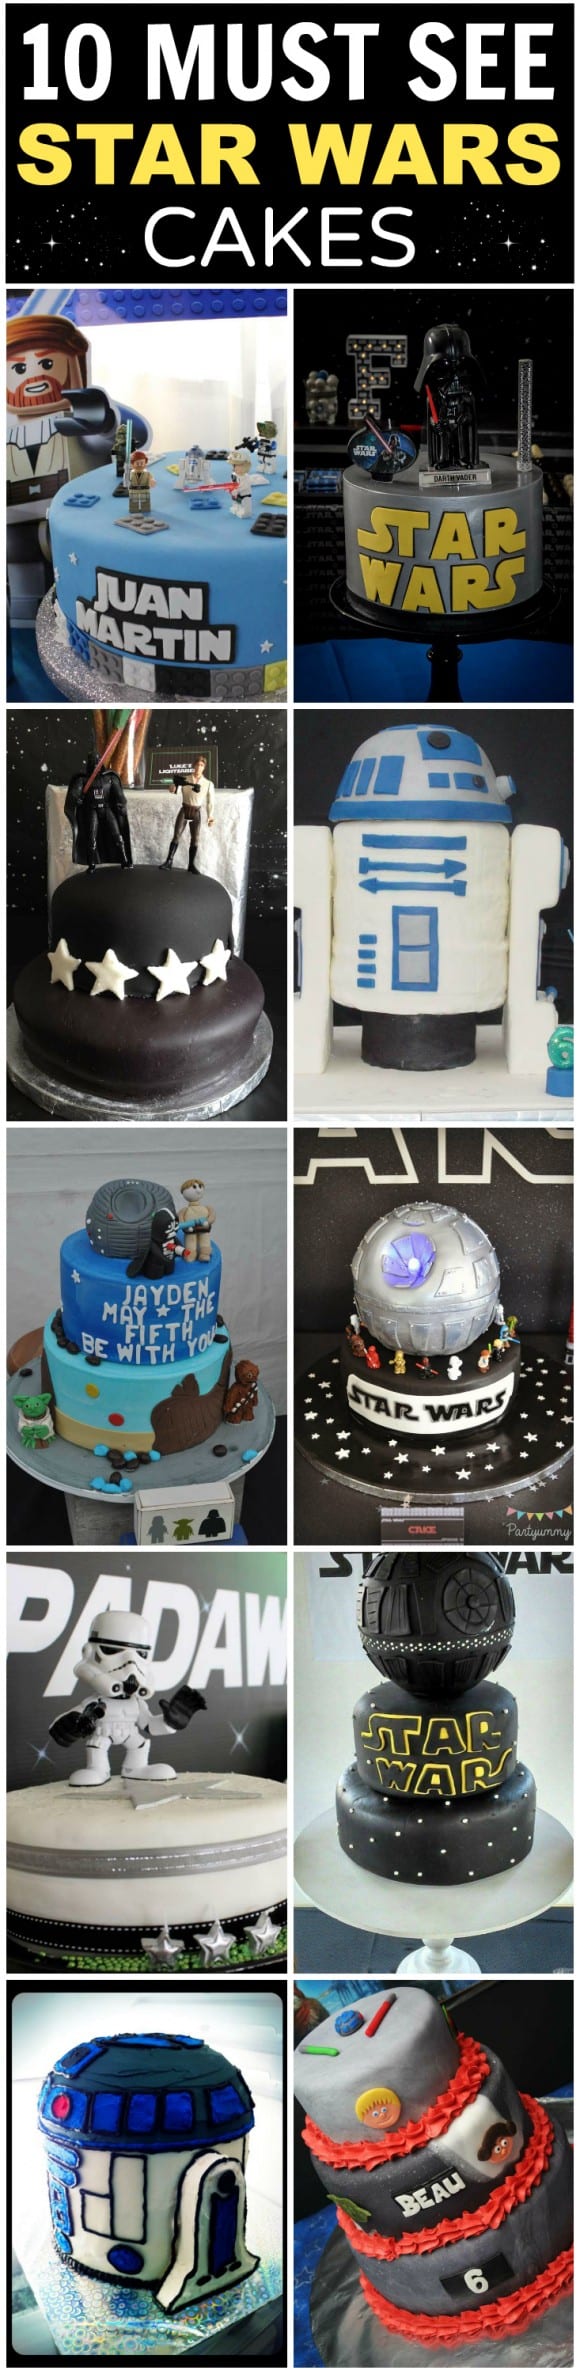 10 Must-See Star Wars Birthday Cakes -- Great inspiration for your Star Wars party! | CatchMyParty.com